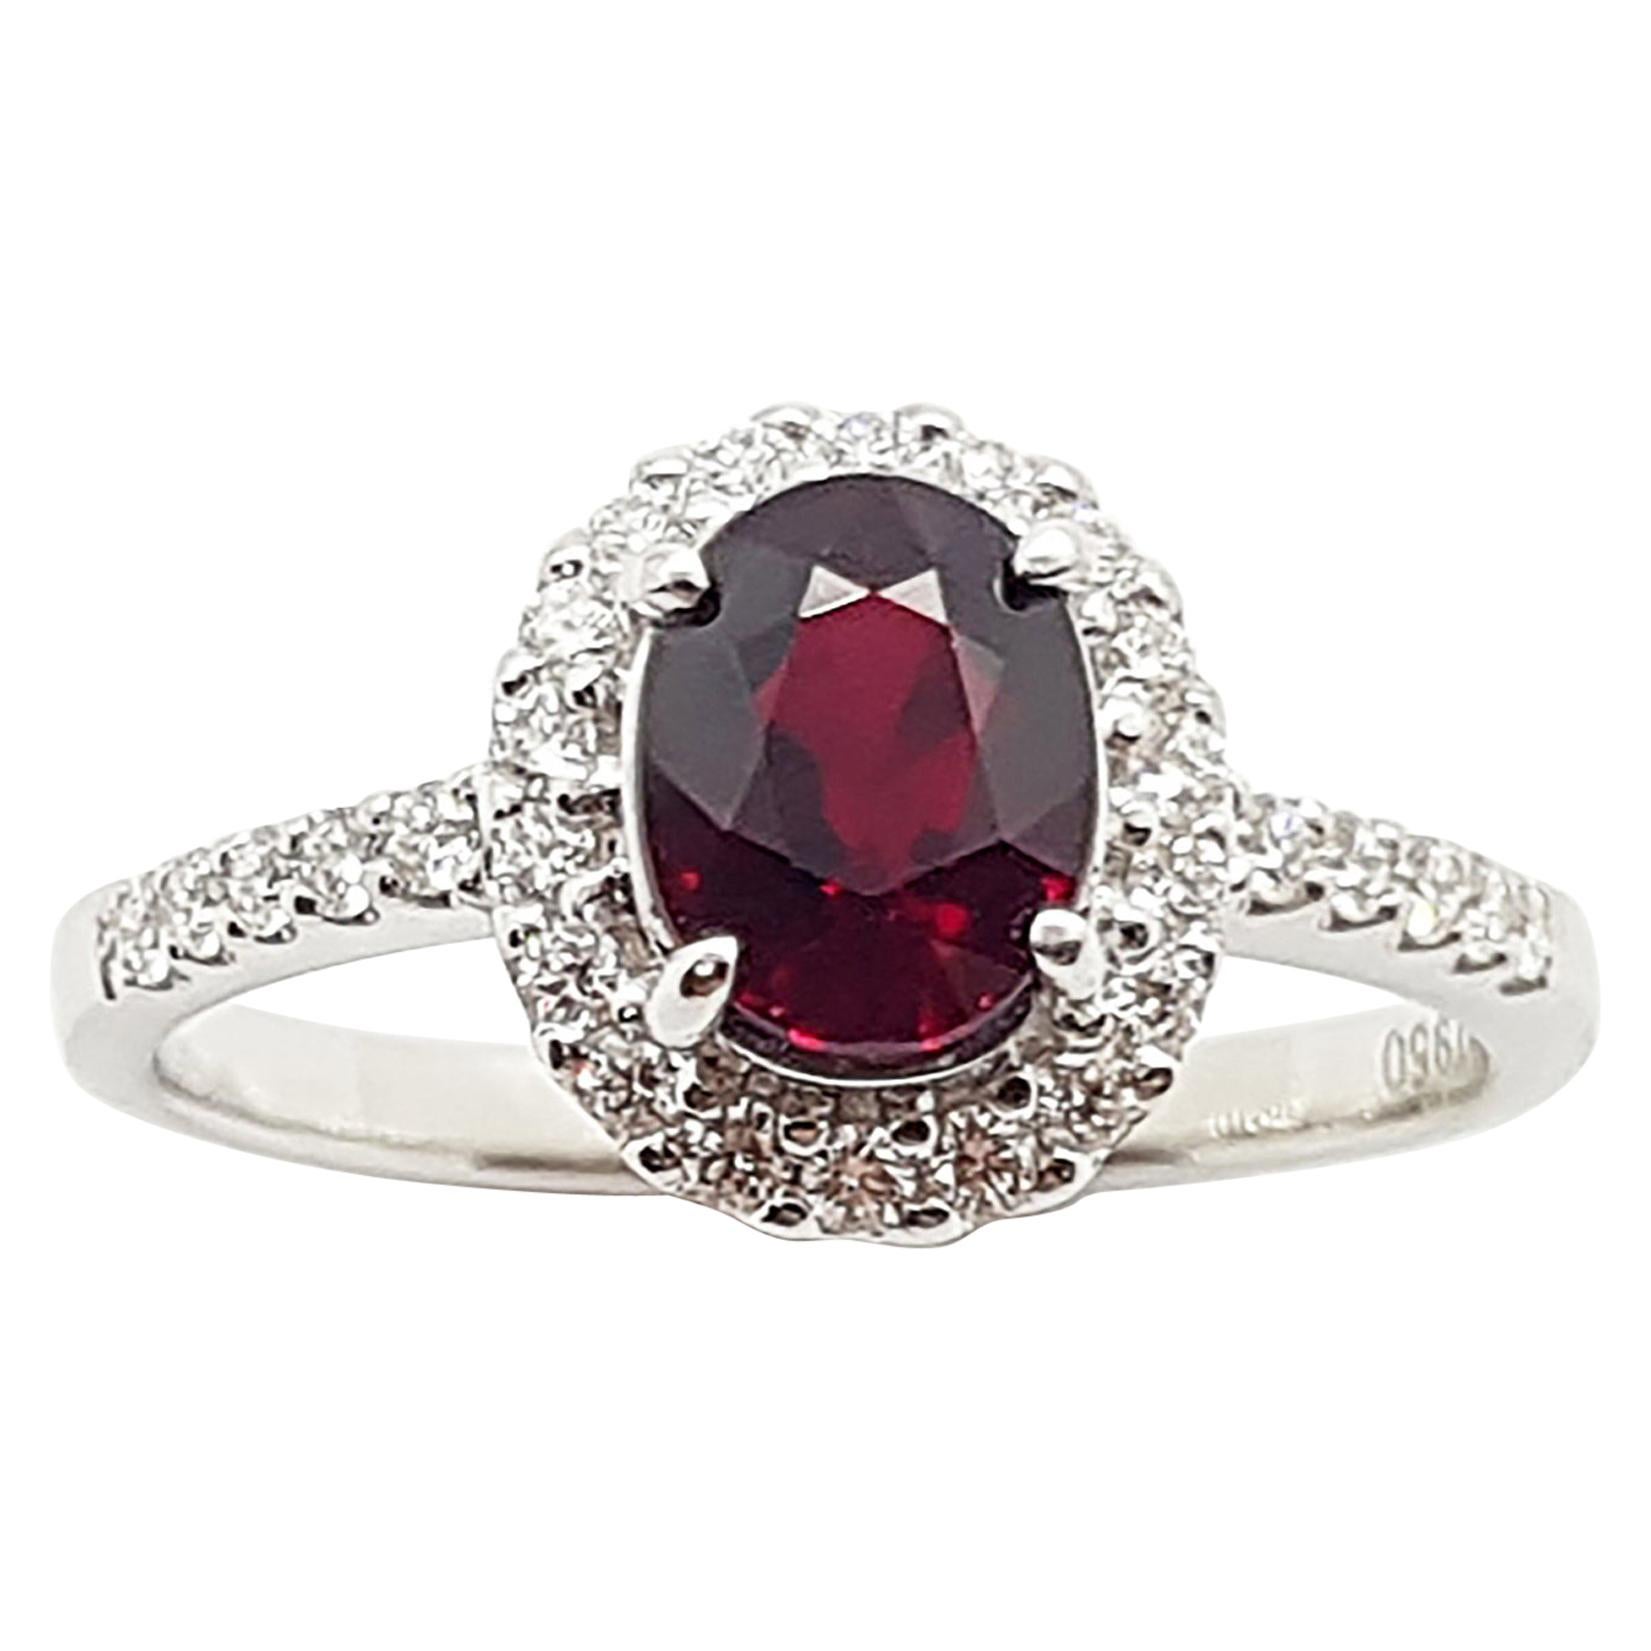 Certified Unheated Ruby with Diamond Ring Set in Platinum 950 Settings For Sale